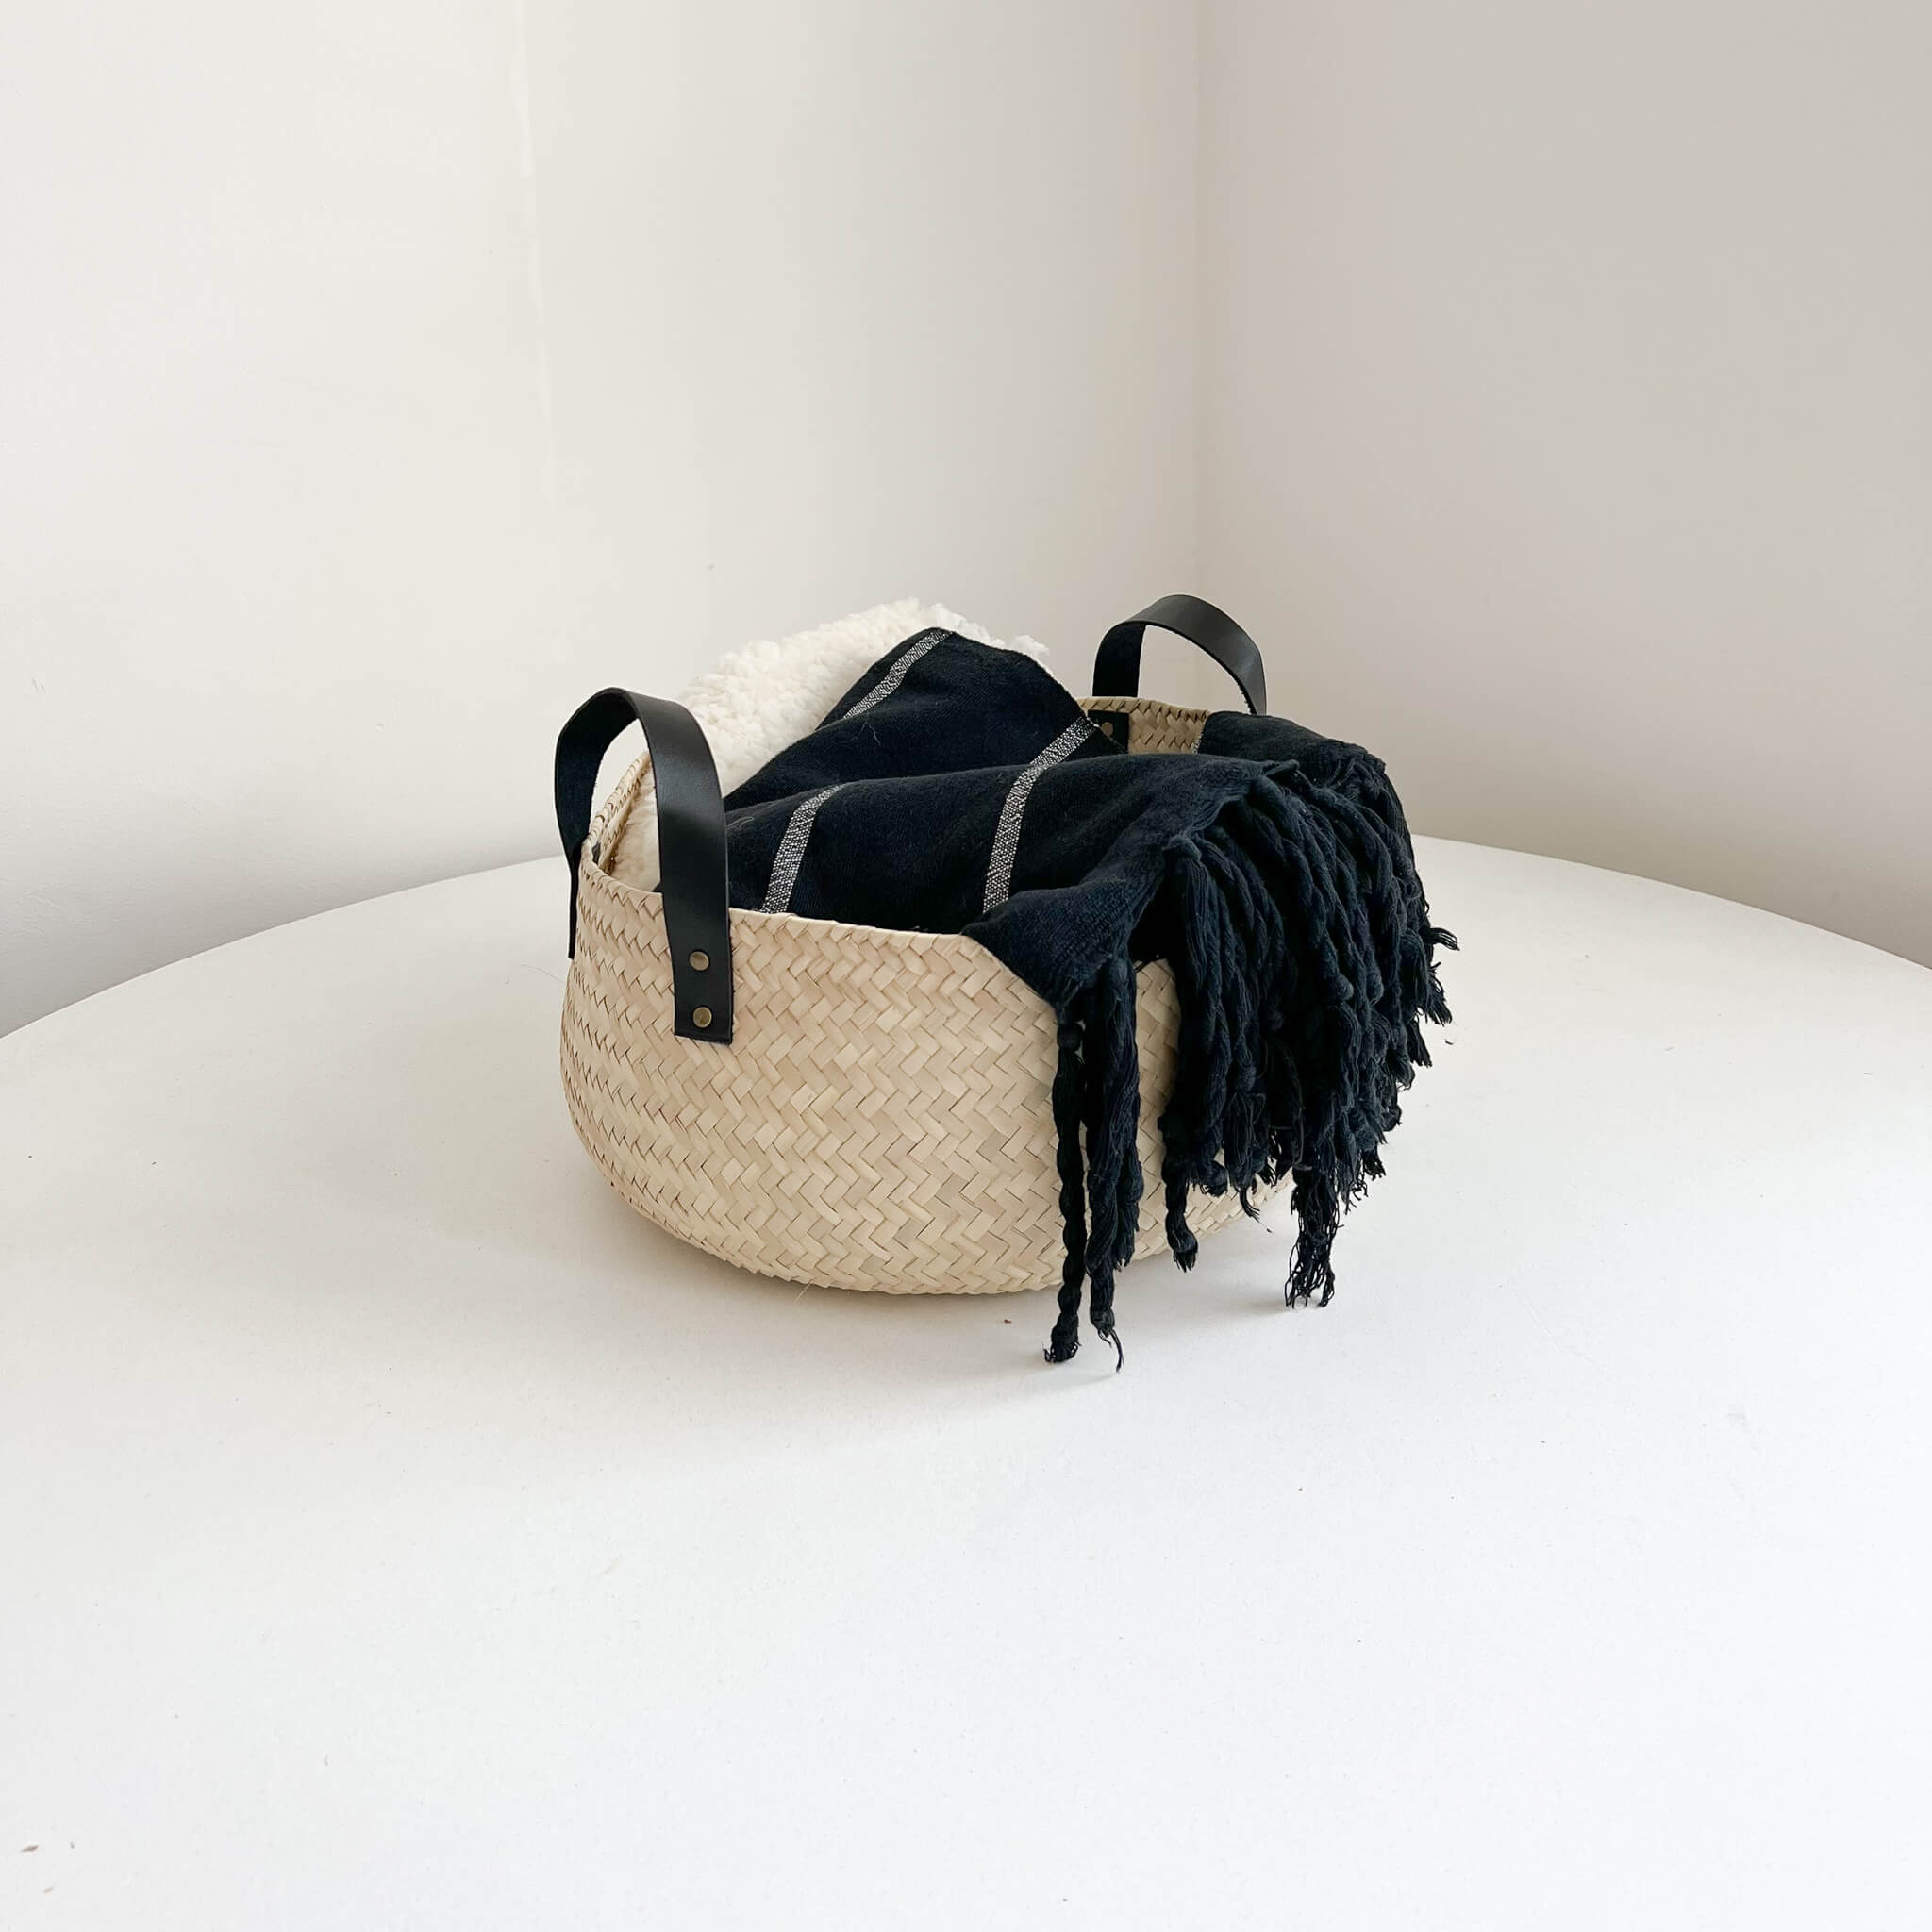 A large Oaxaca storage basket with black leather handles with a black towel and sheep shearling inside.